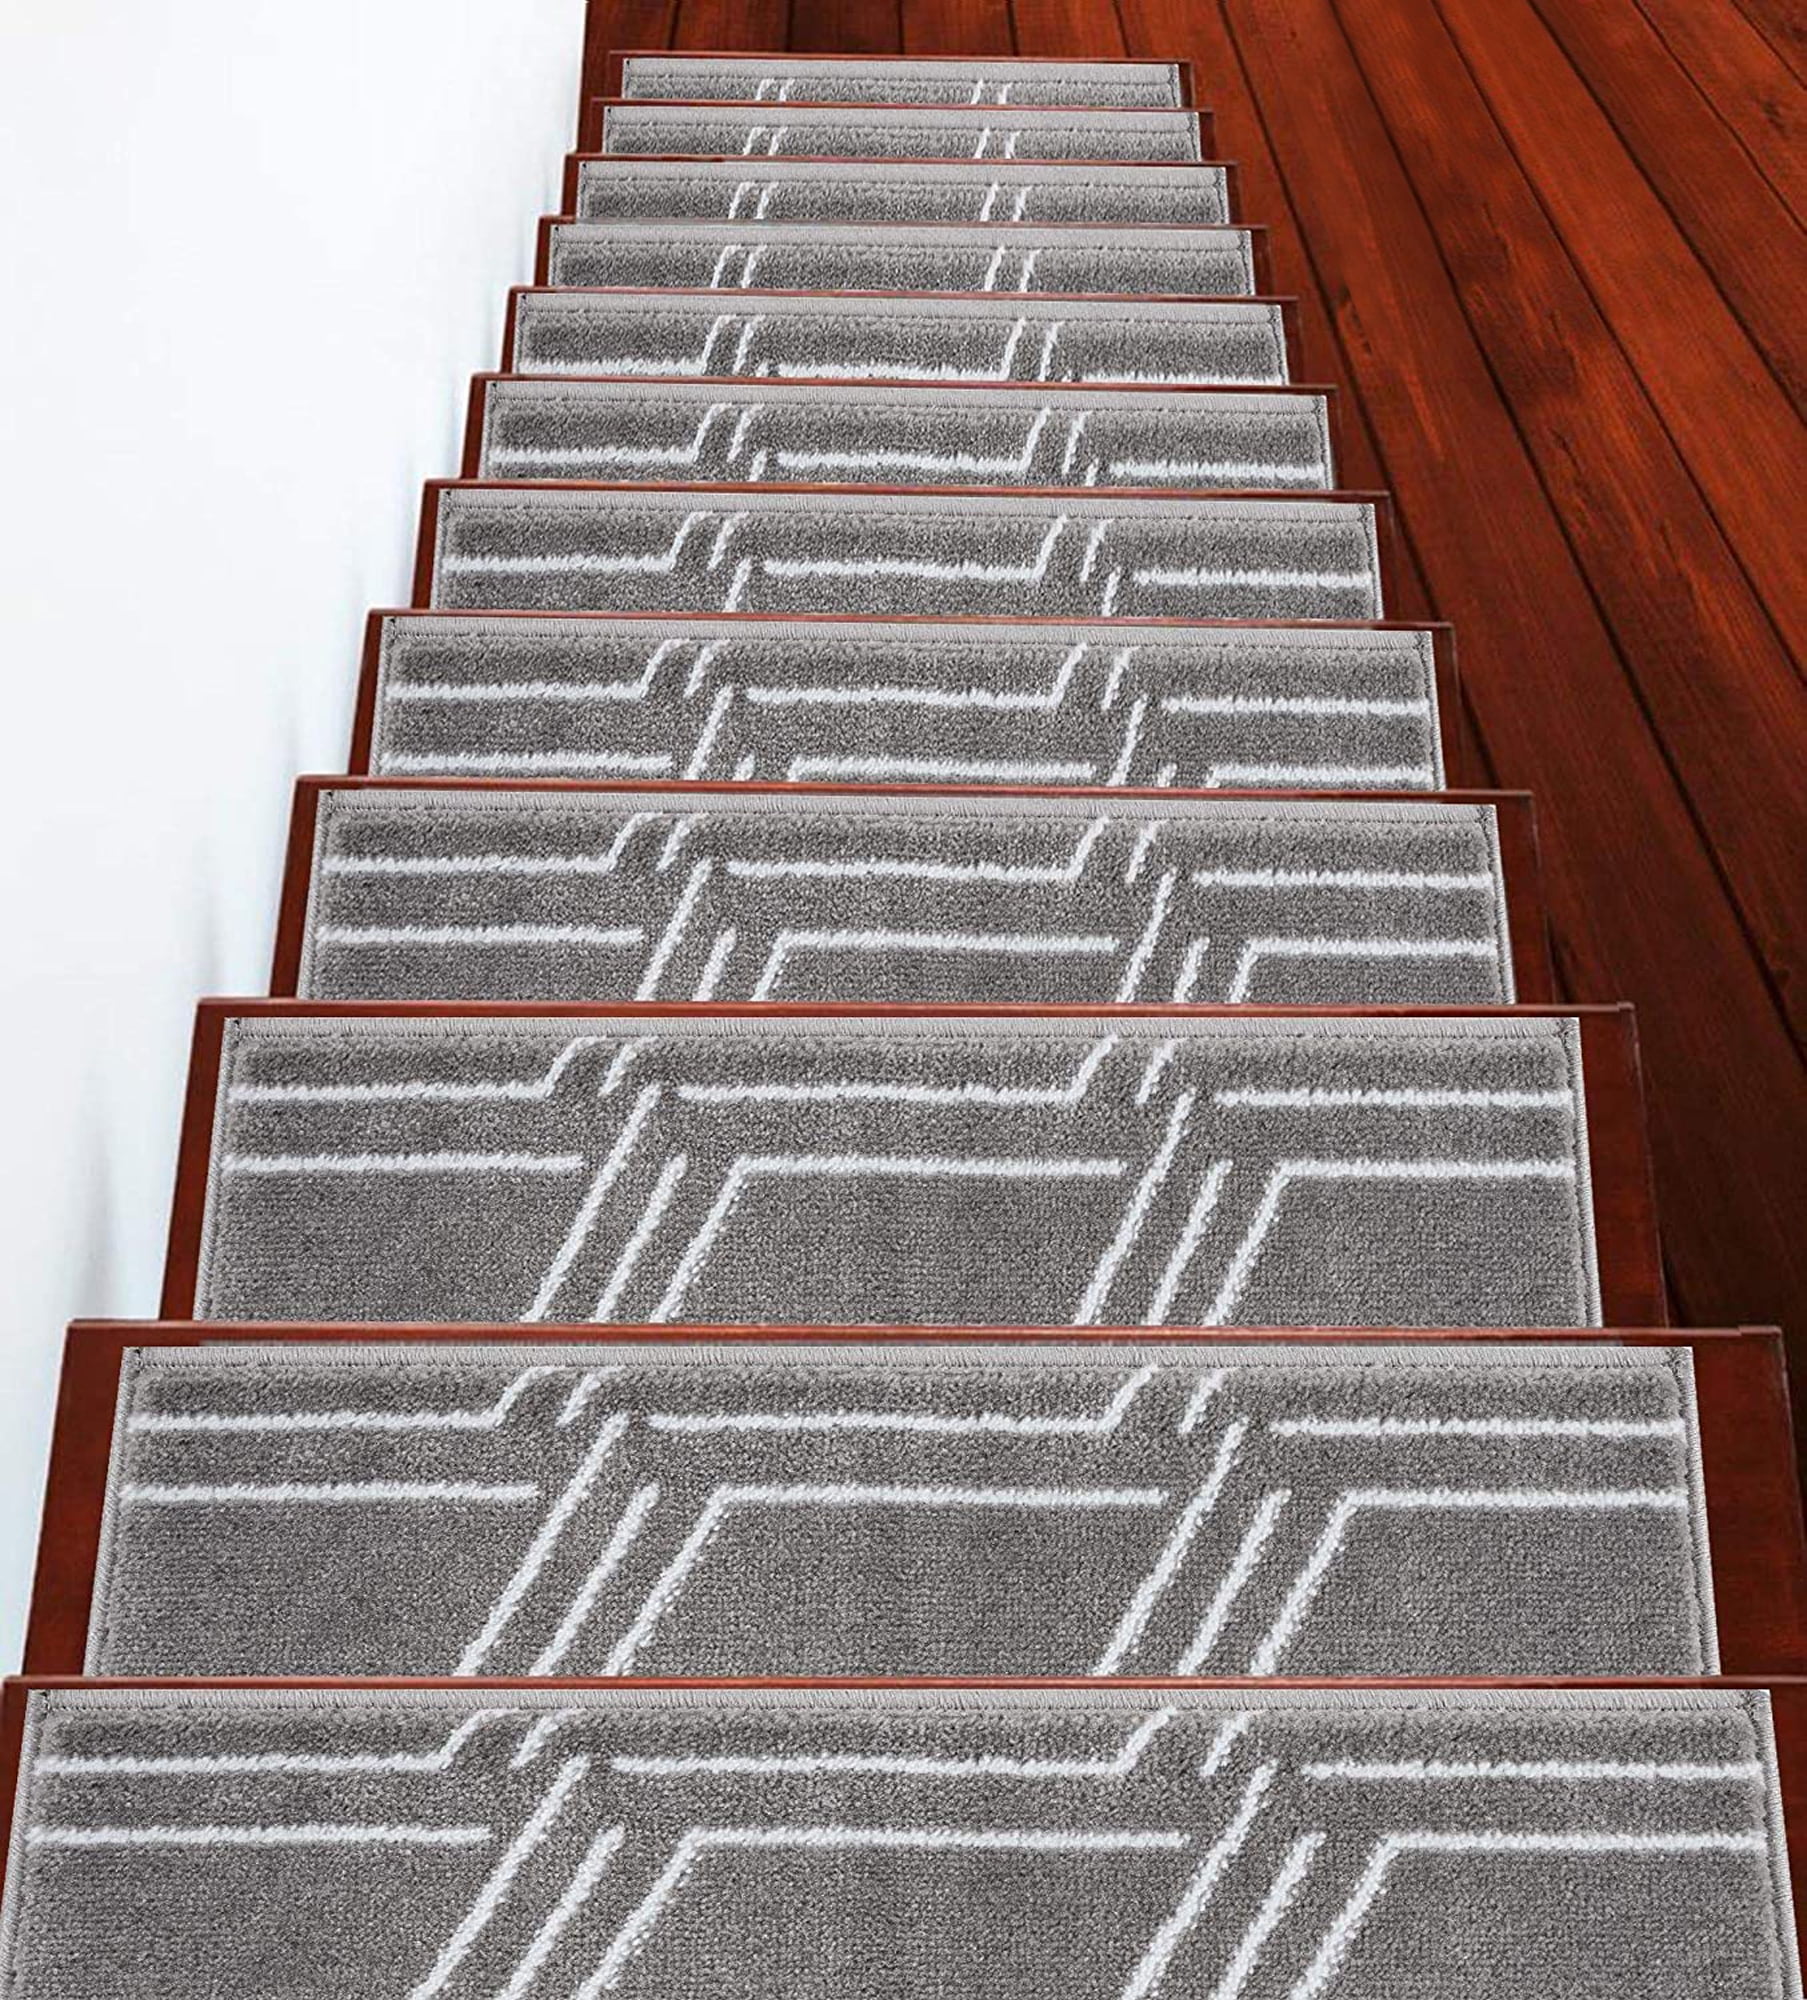 Set 13 Steps Stair Area Rug Treads Carpet Floral Non-slip Staircase Protect BIN 